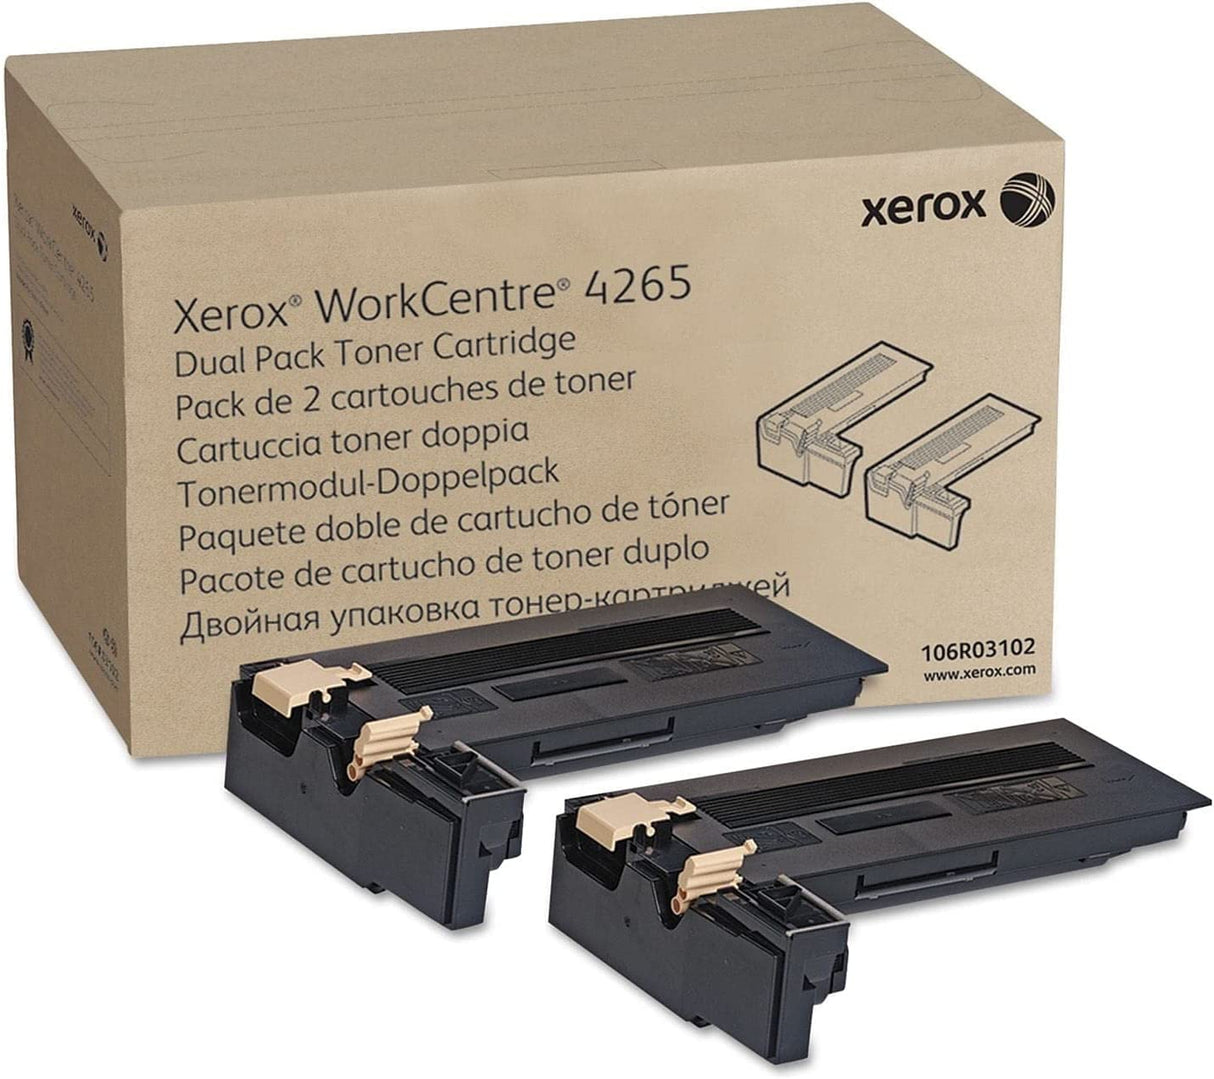 Xerox WorkCentre 4265 Black Toner-Cartridge - 2 Pack (50,000 Pages) - 106R03102 Standard Capacity